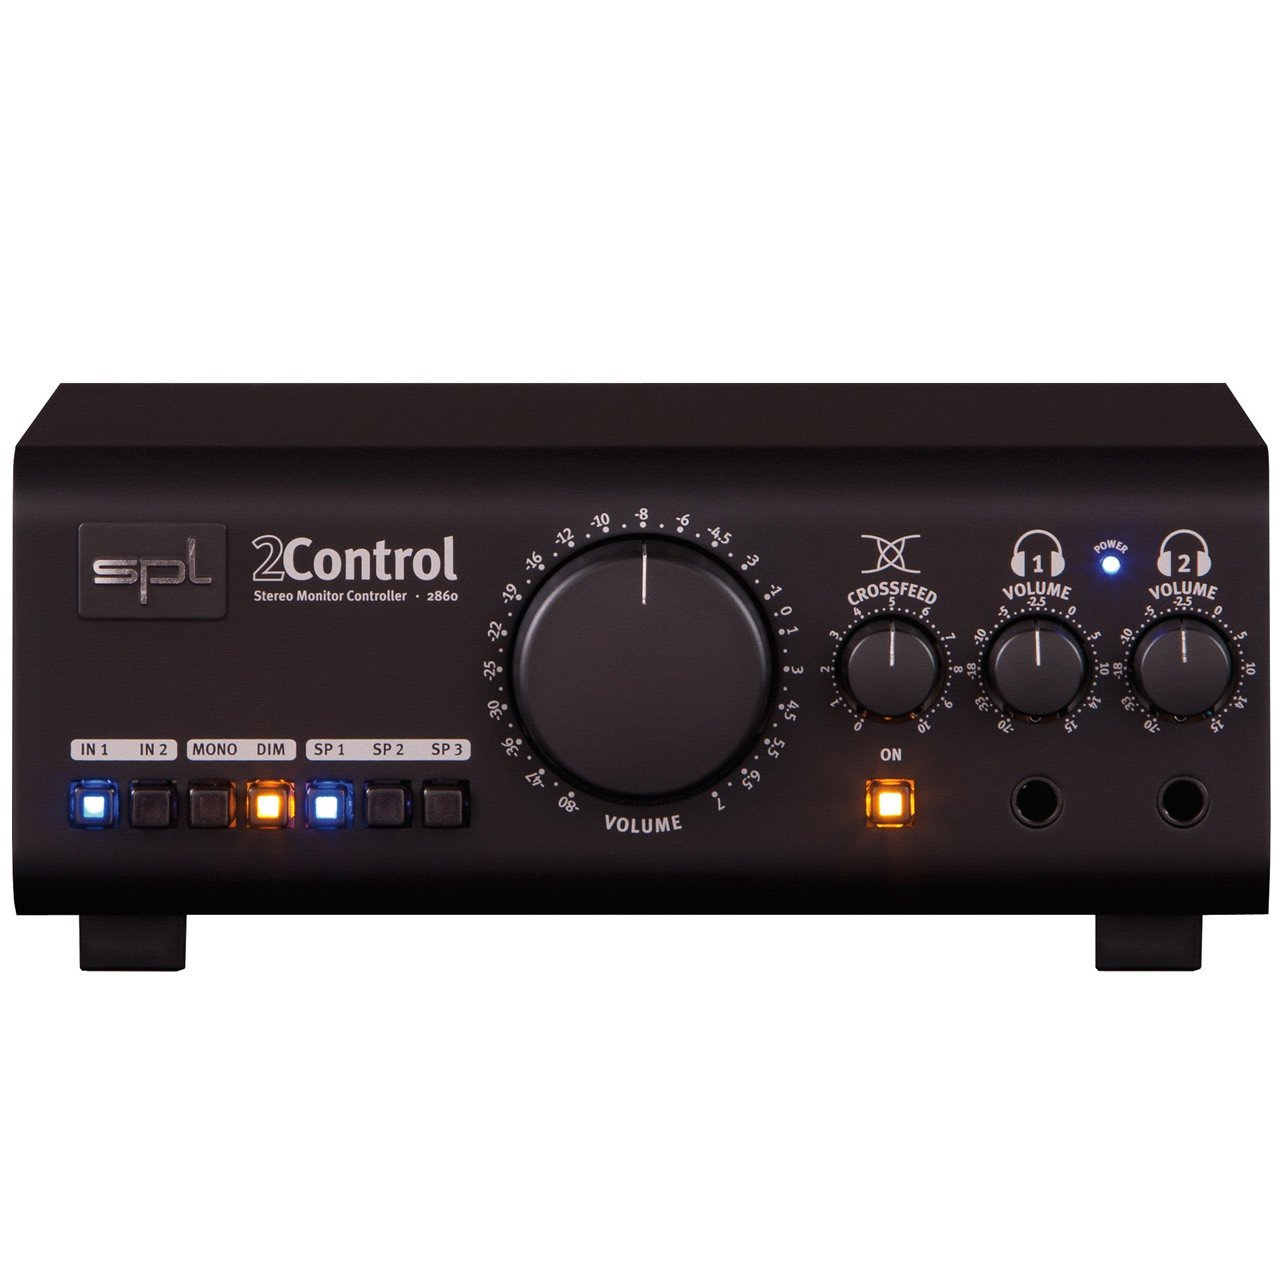 Monitor Controllers - SPL 2Control Dual High Quality Headphone Amp Controller